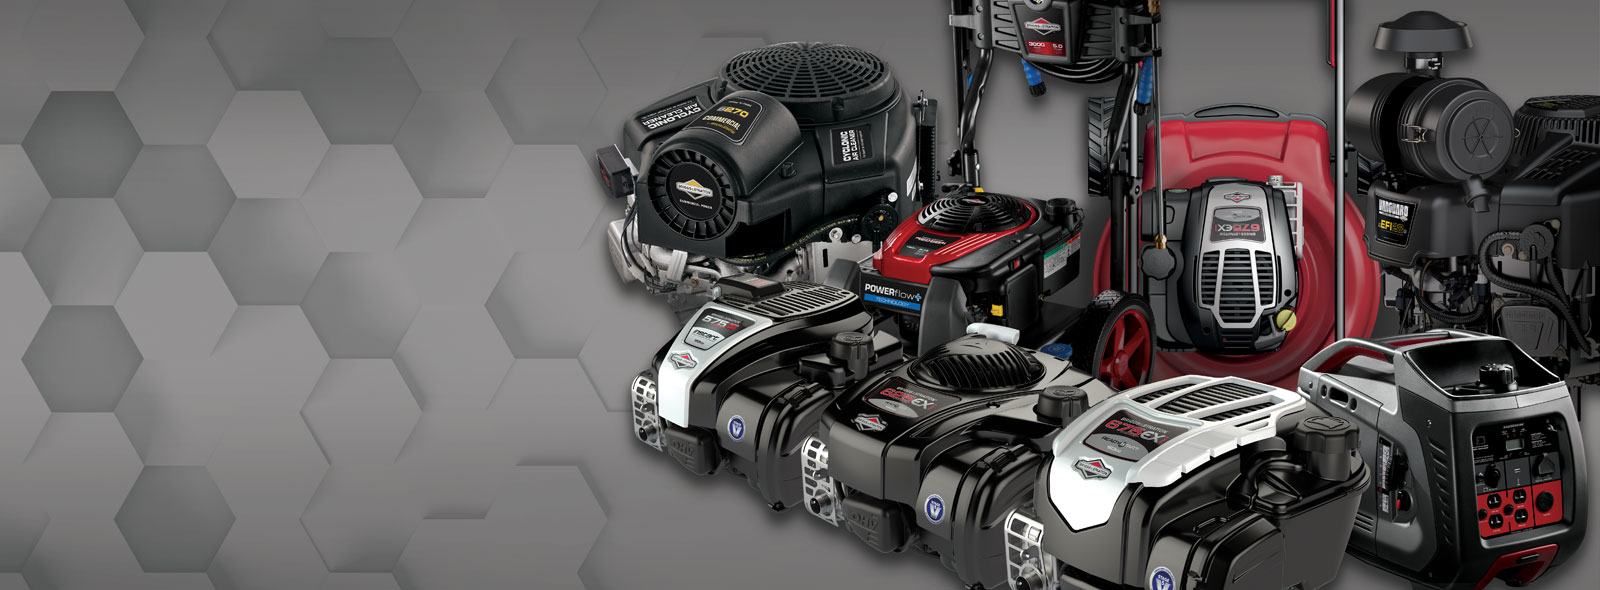 Briggs & Stratton Product Innovations